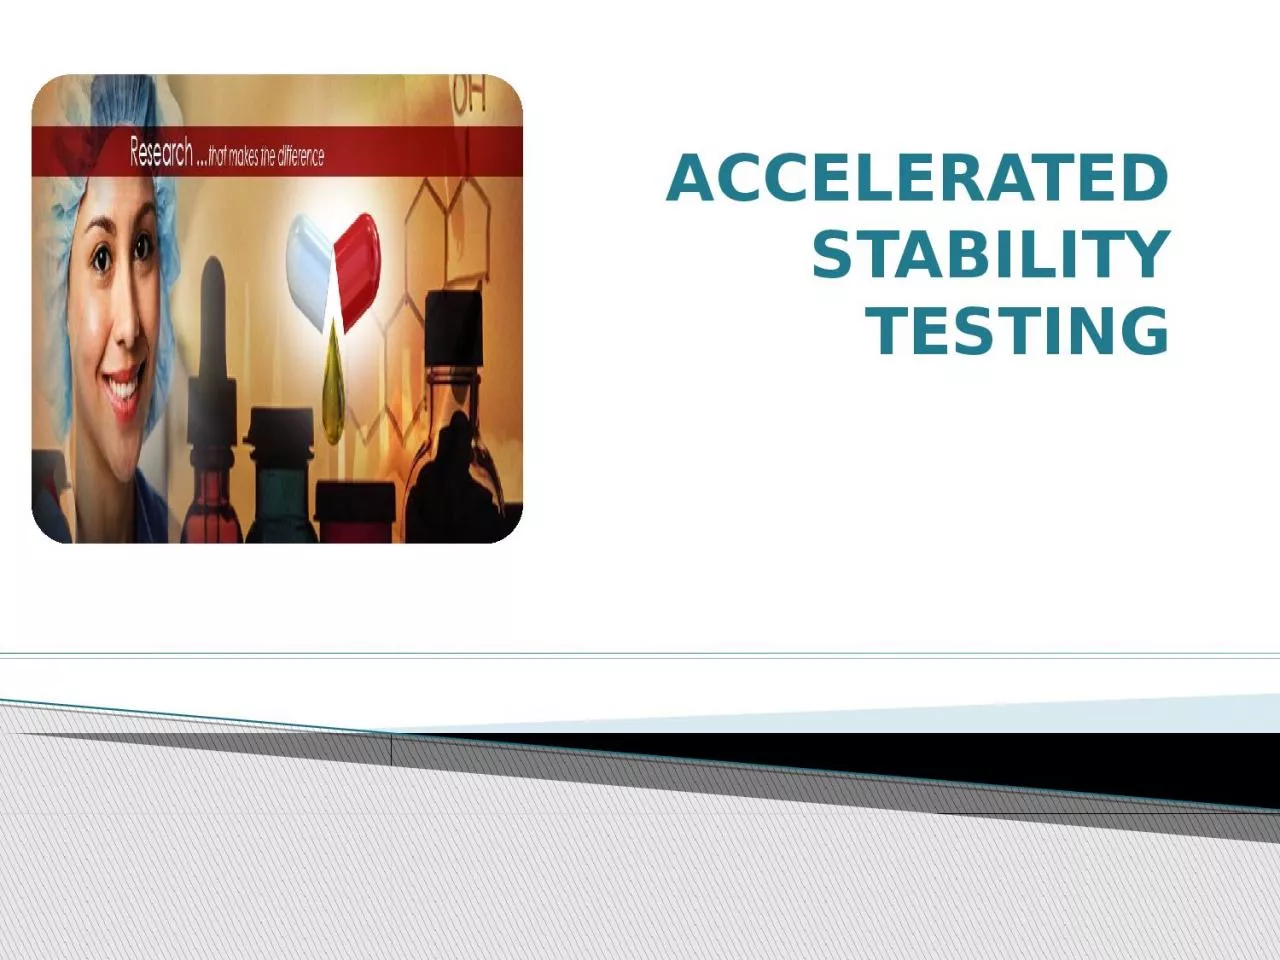 ACCELERATED STABILITY TESTING